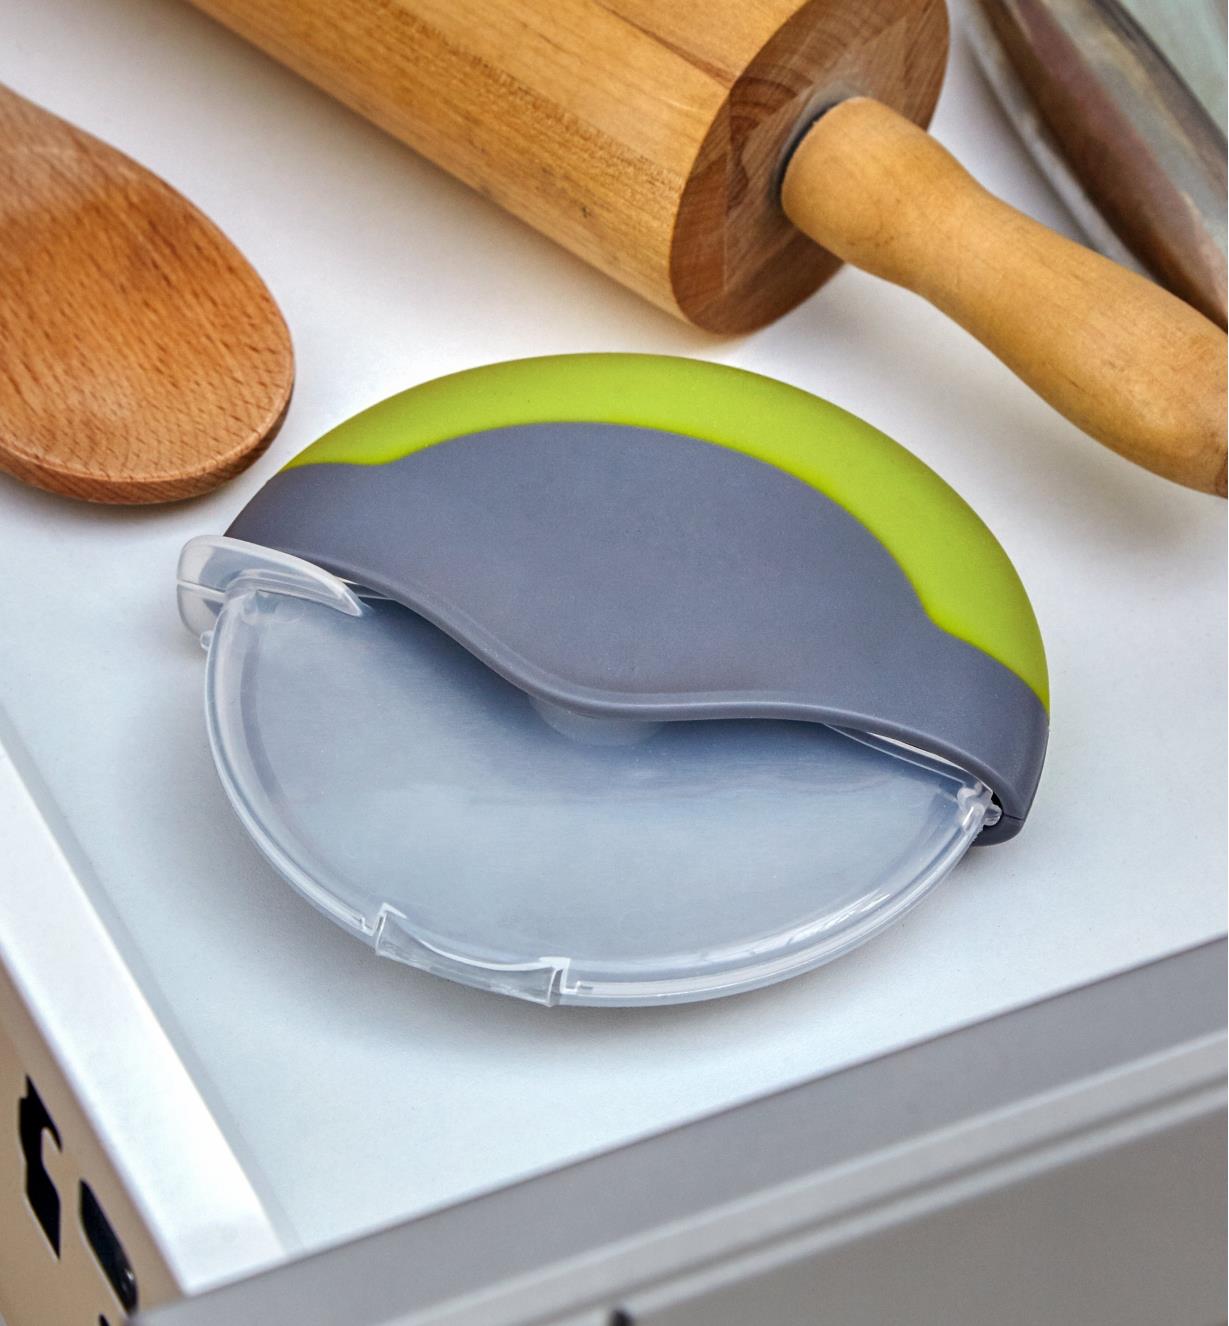 Blade guard in place on the pizza cutter for storing it in a kitchen drawer